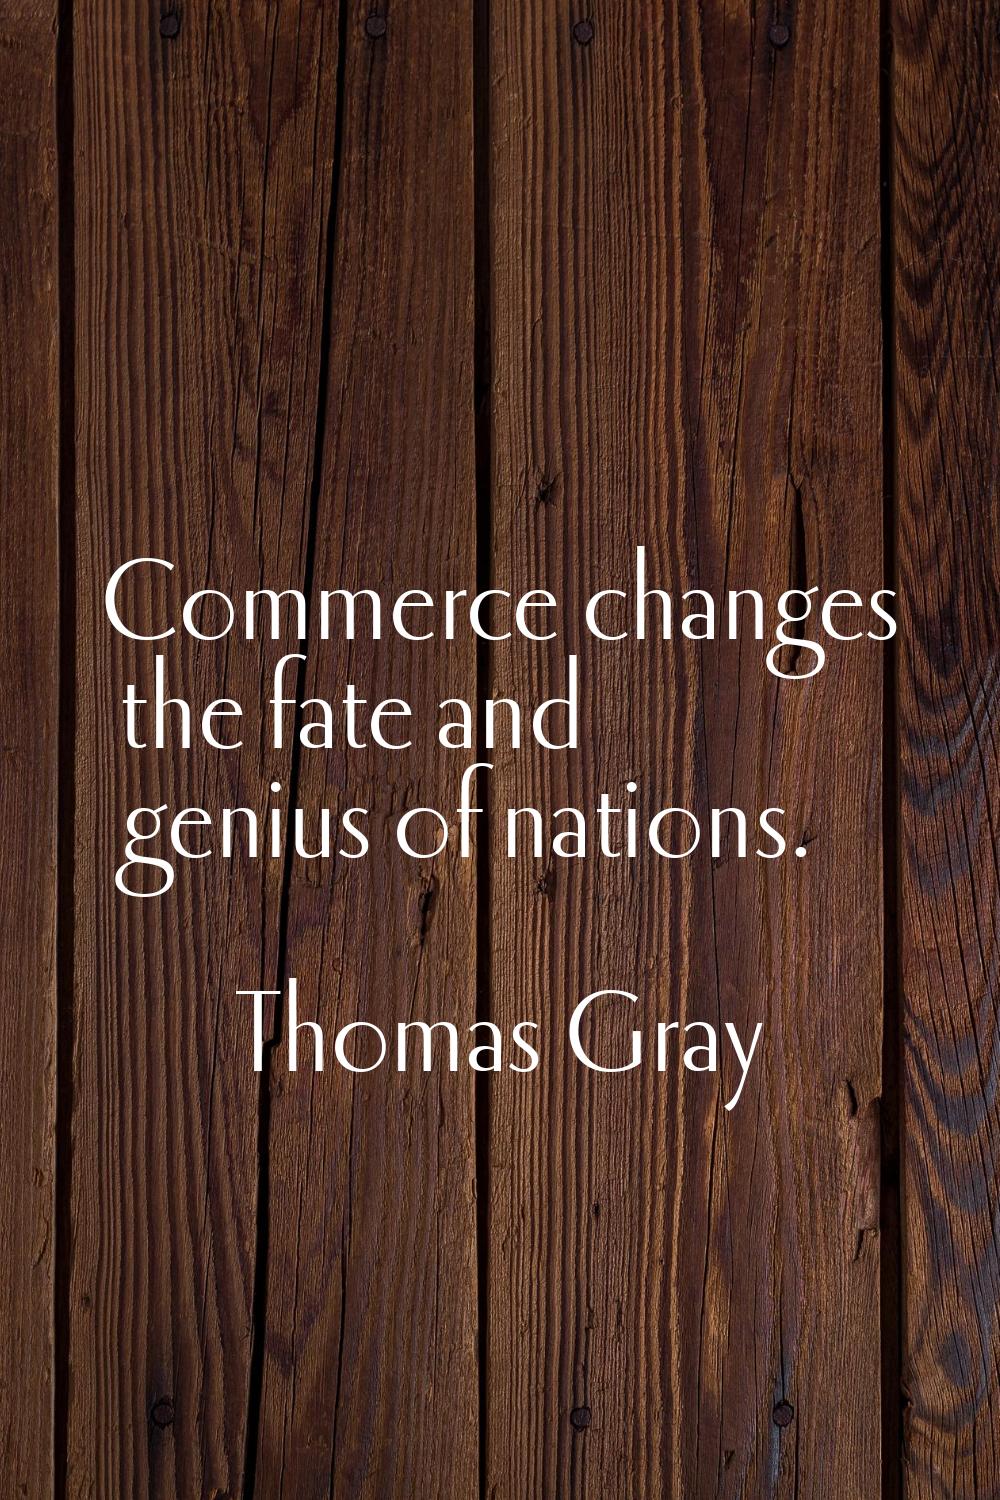 Commerce changes the fate and genius of nations.